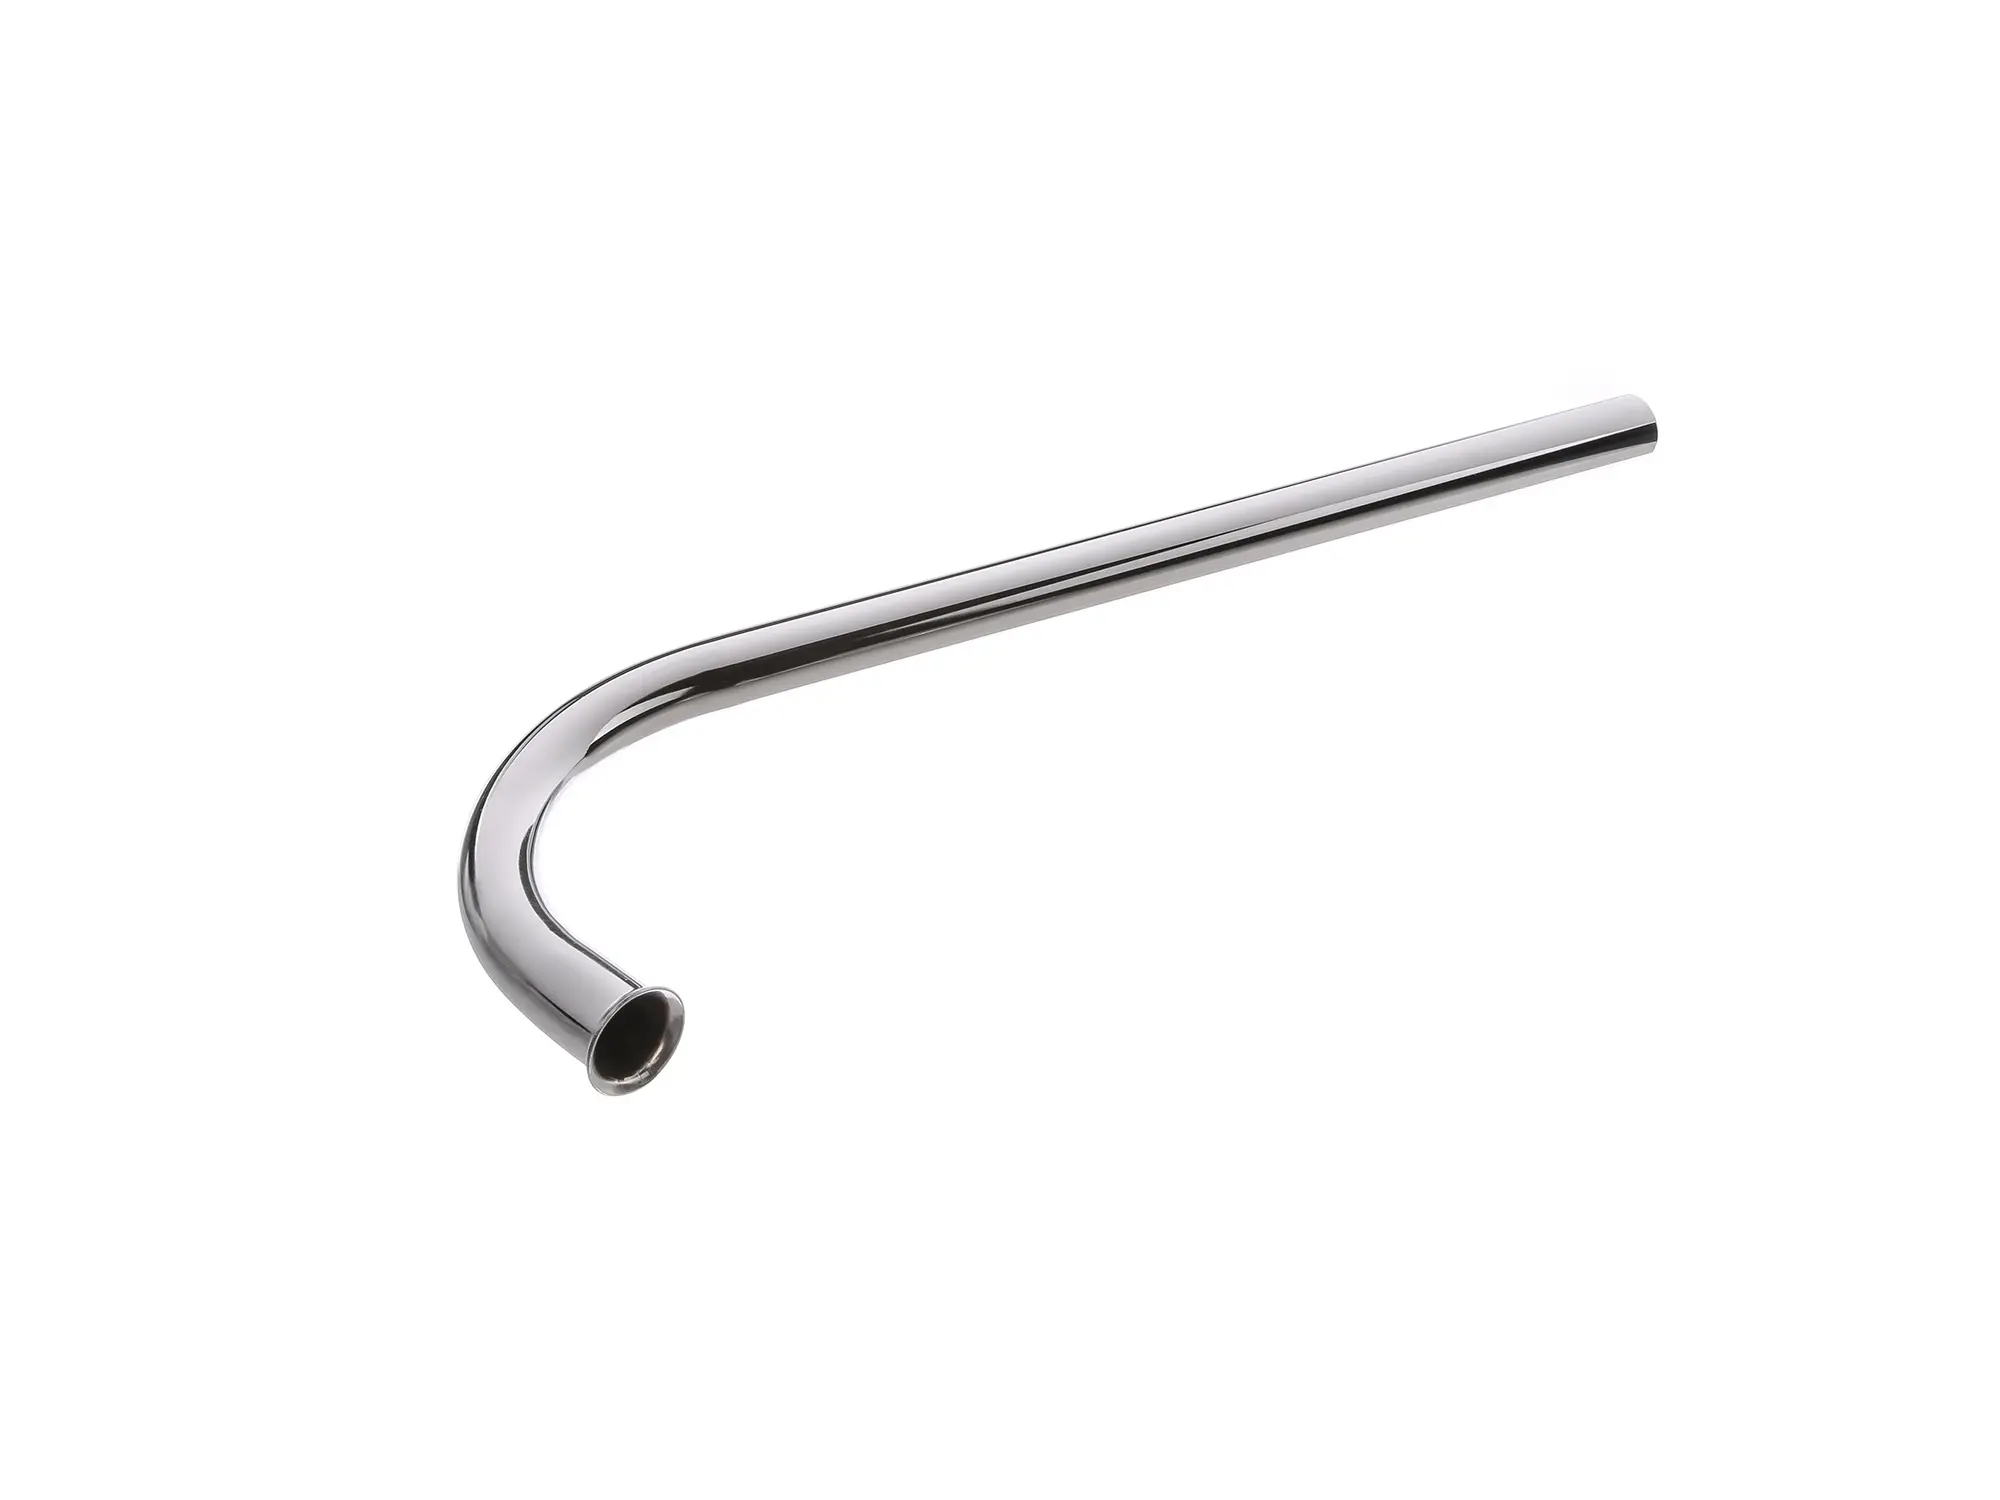 Elbow 500 long - stretched length approx. 610 - chrome plated - KR50, SR4-1, Item no: 10060921 - Image 1